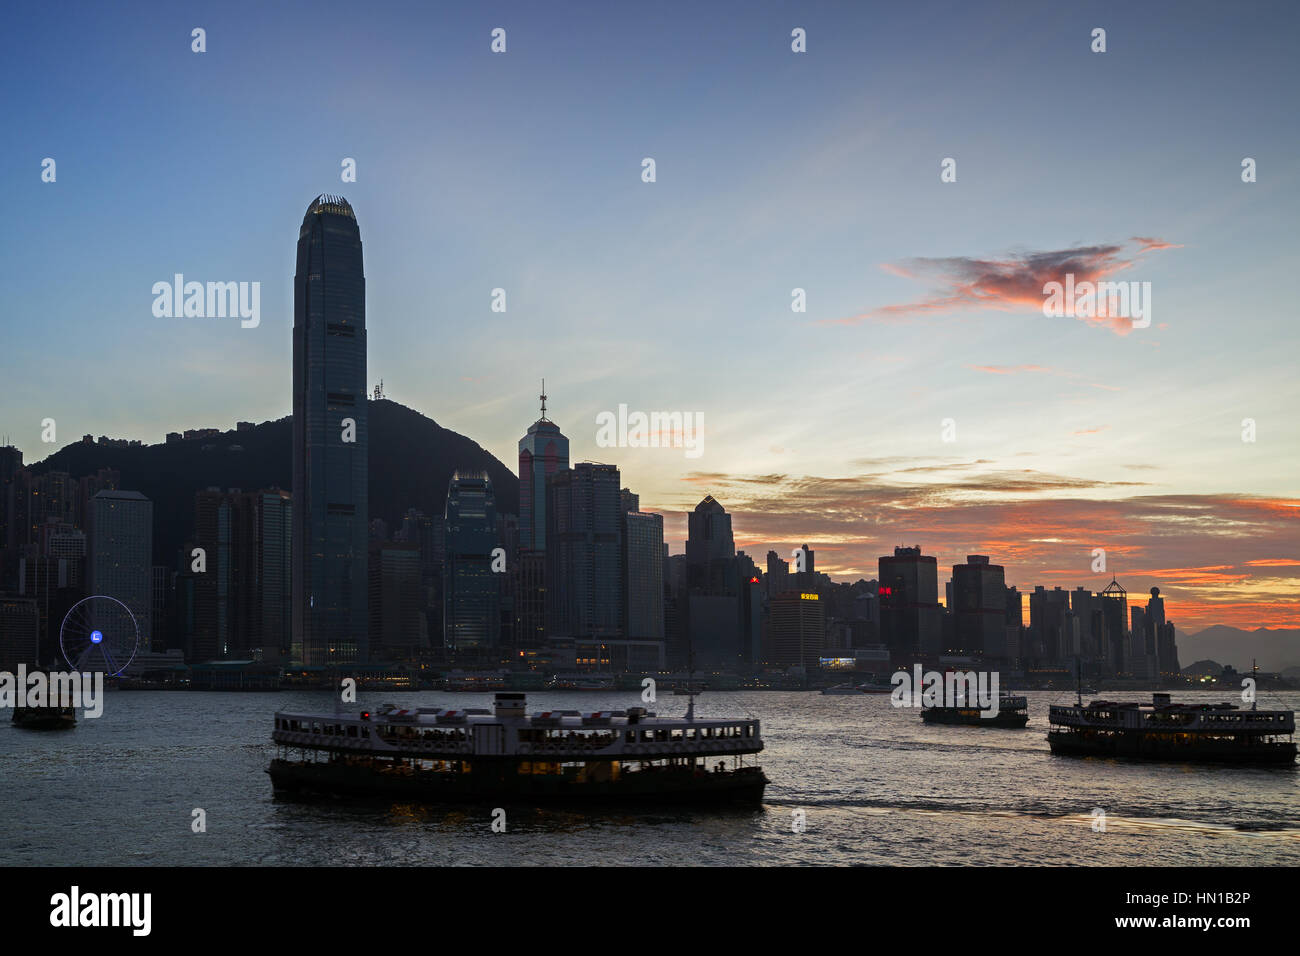 Silhouette of four Star Ferries, skyscrapers and other buildings on Hong Kong Island in Hong Kong, China, at sunset. Viewed from the Tsim Sha Tsui. Stock Photo